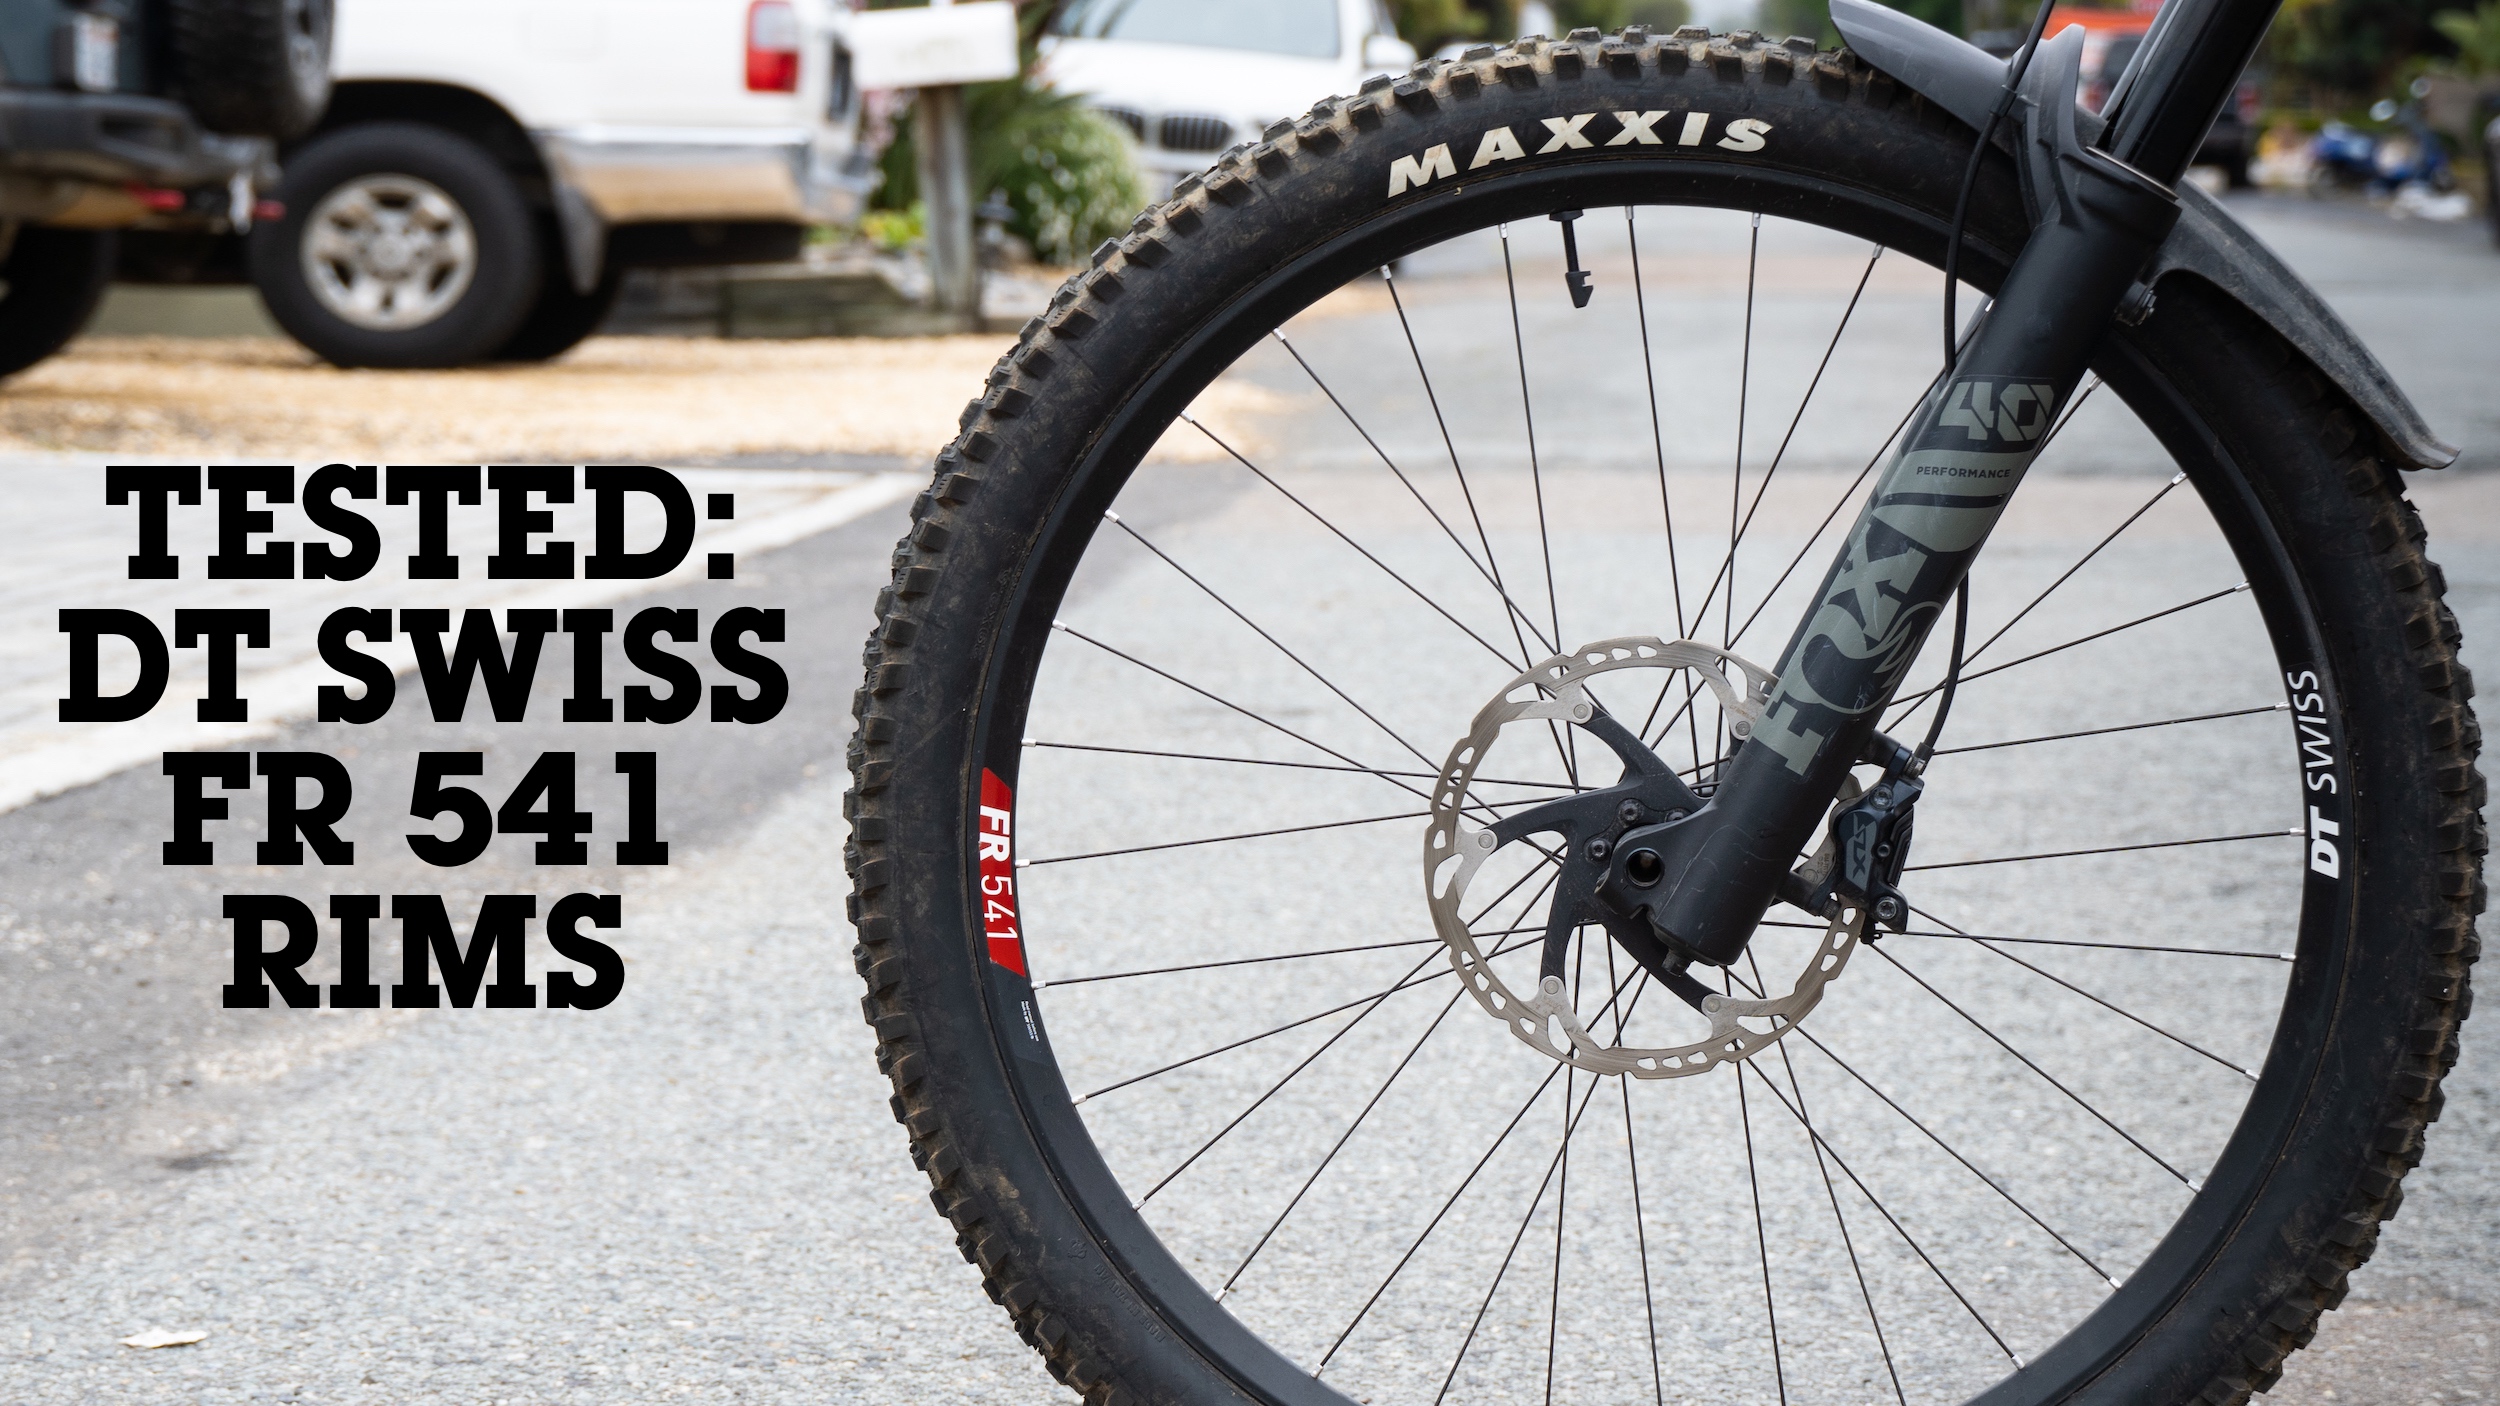 TESTED: DT Swiss FR541 Rim – Mountain Bike Feature